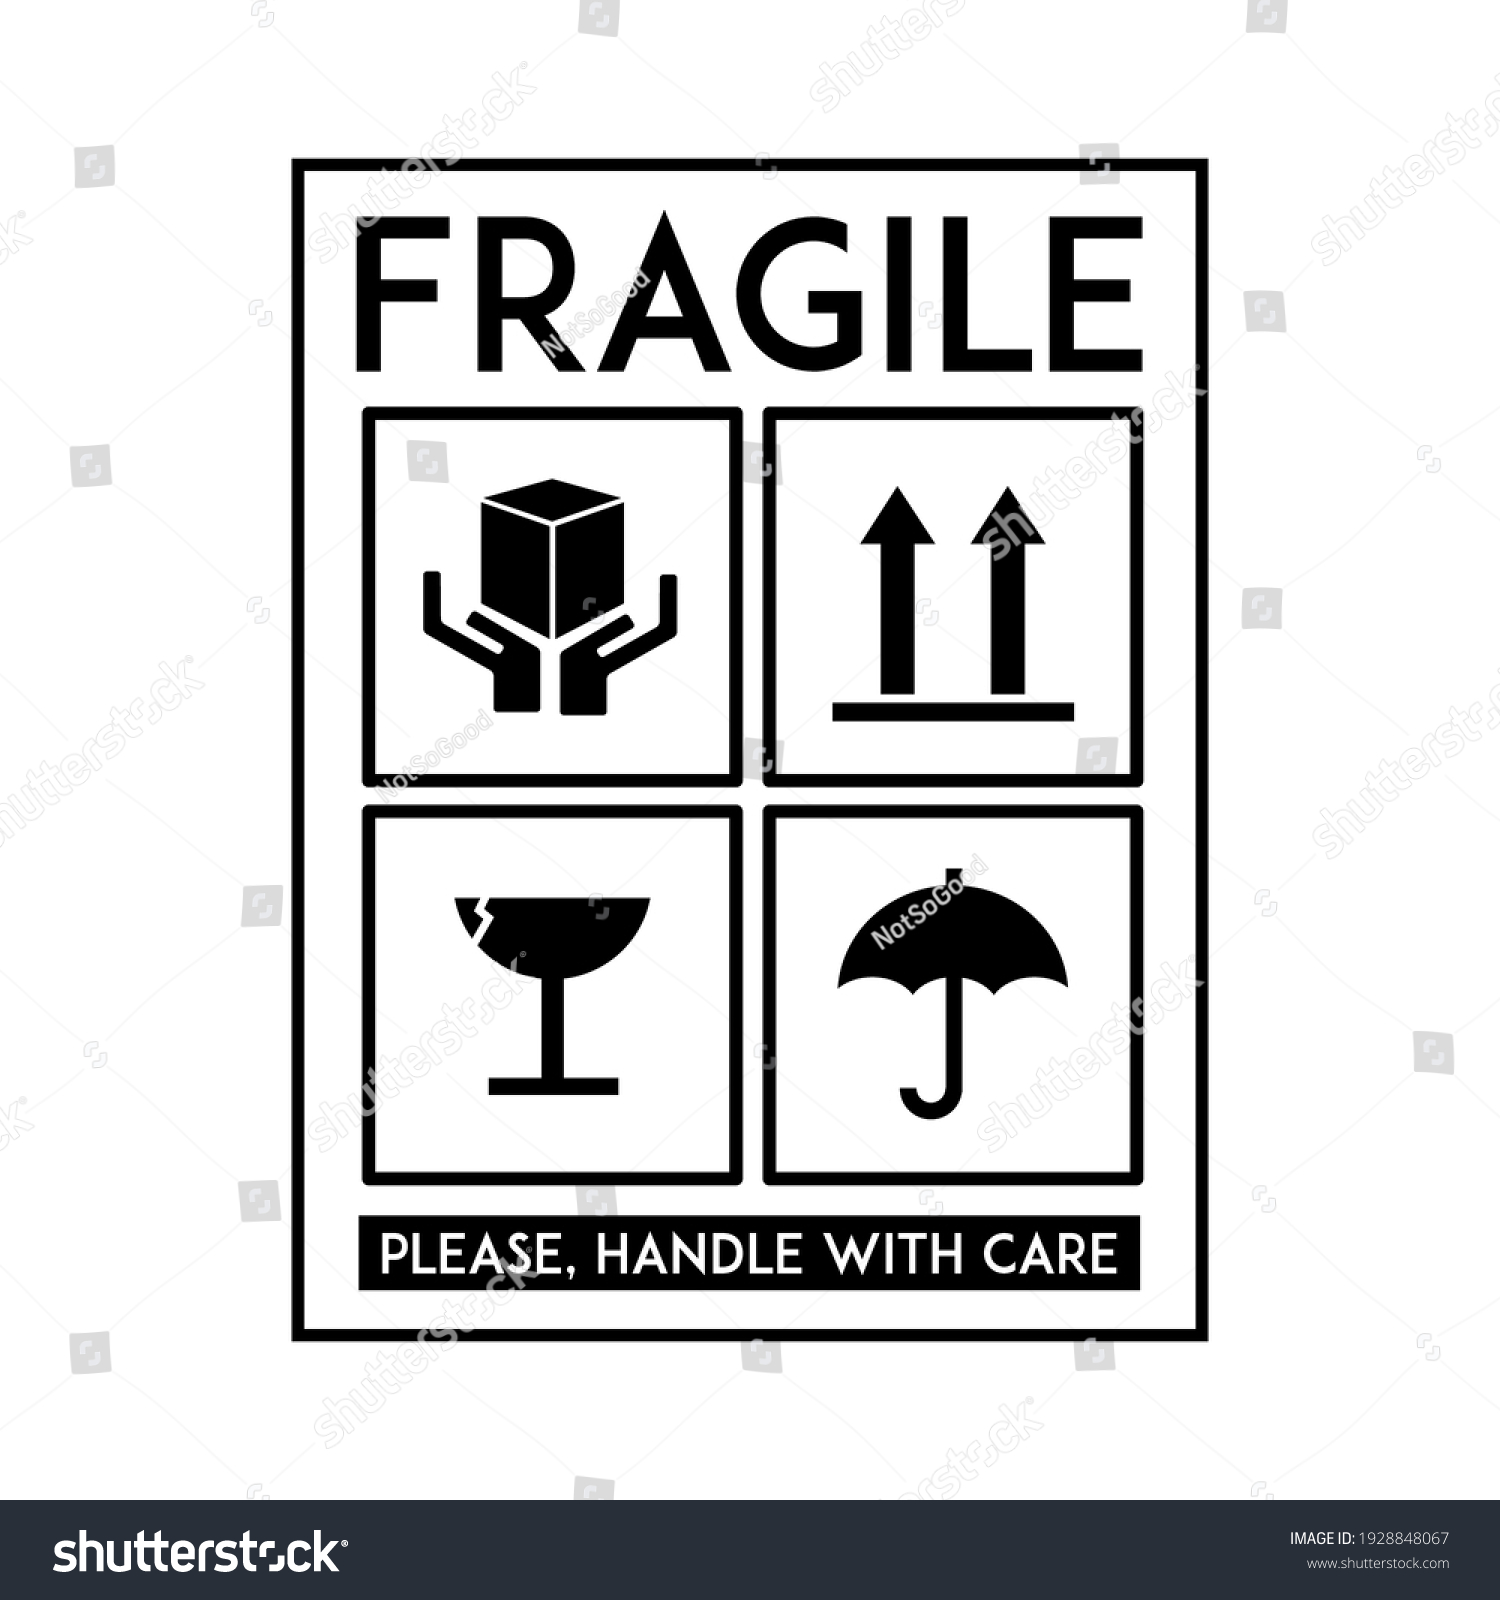 Fragile Packaging Images Stock Photos Vectors Shutterstock